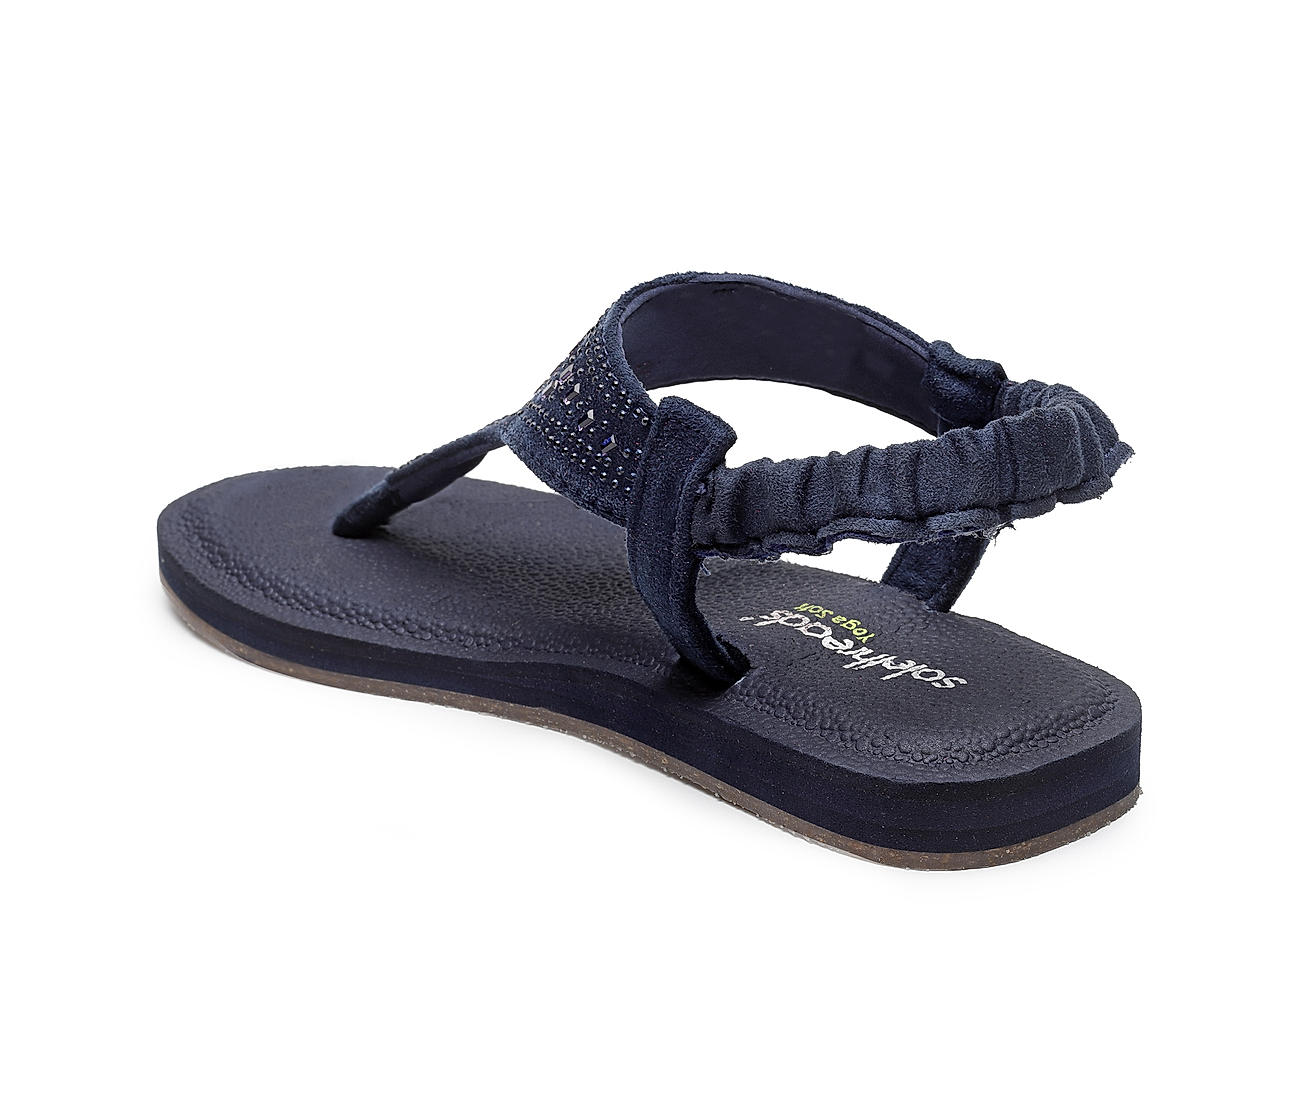 Buy Sole Threads Women's Navy Yoga Sling Sandals Online at Regal Shoes